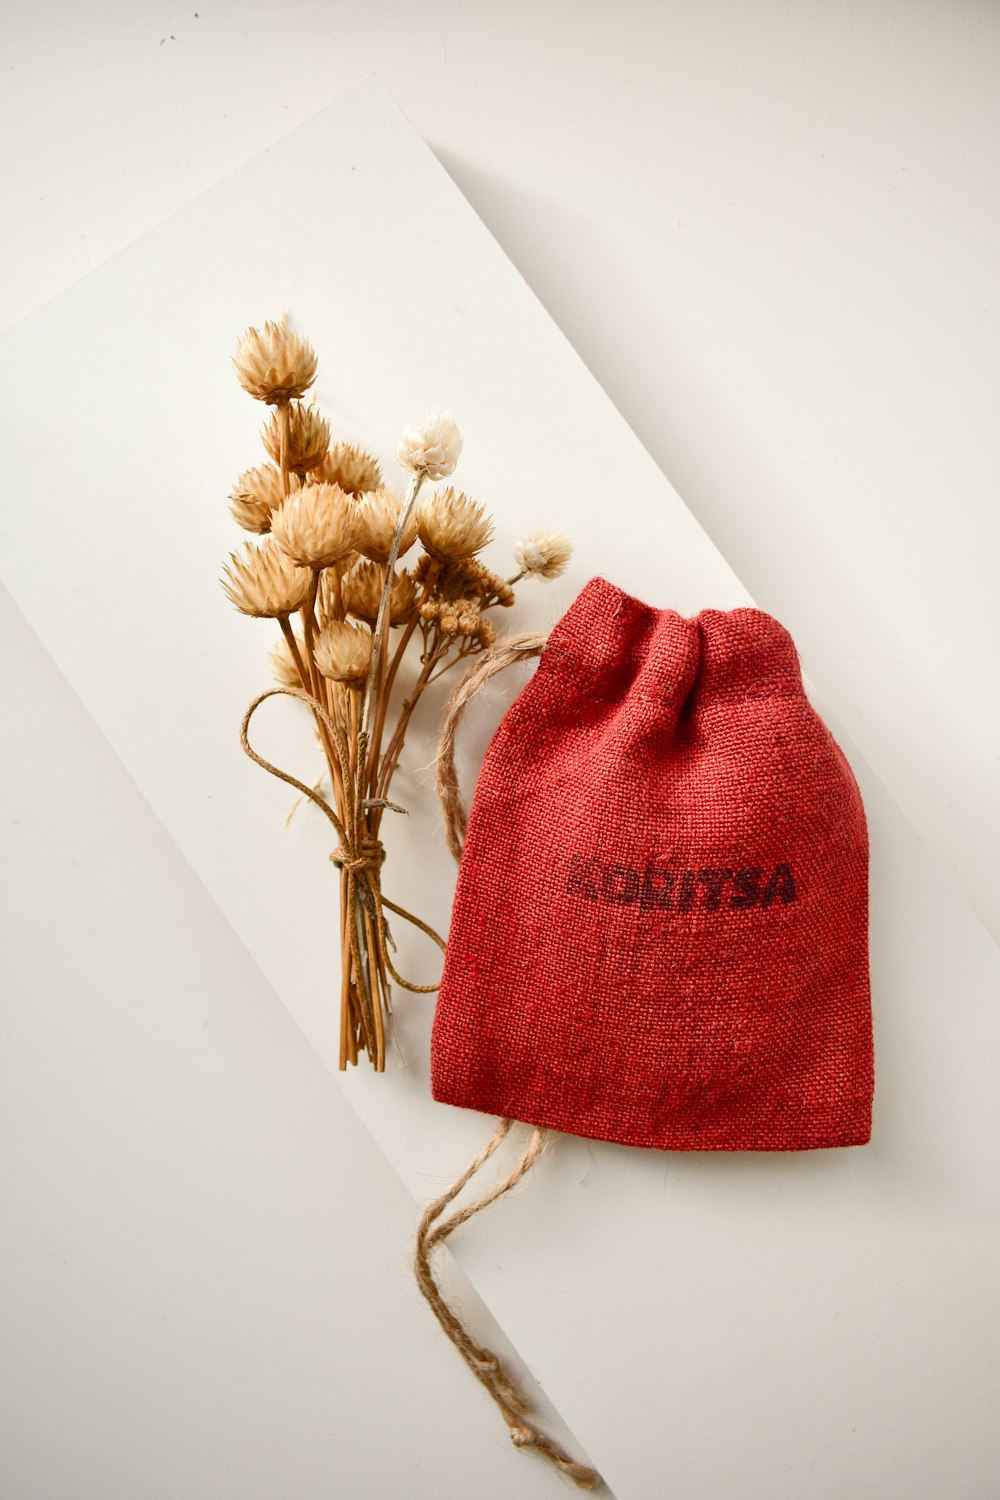 red knit cap on white table